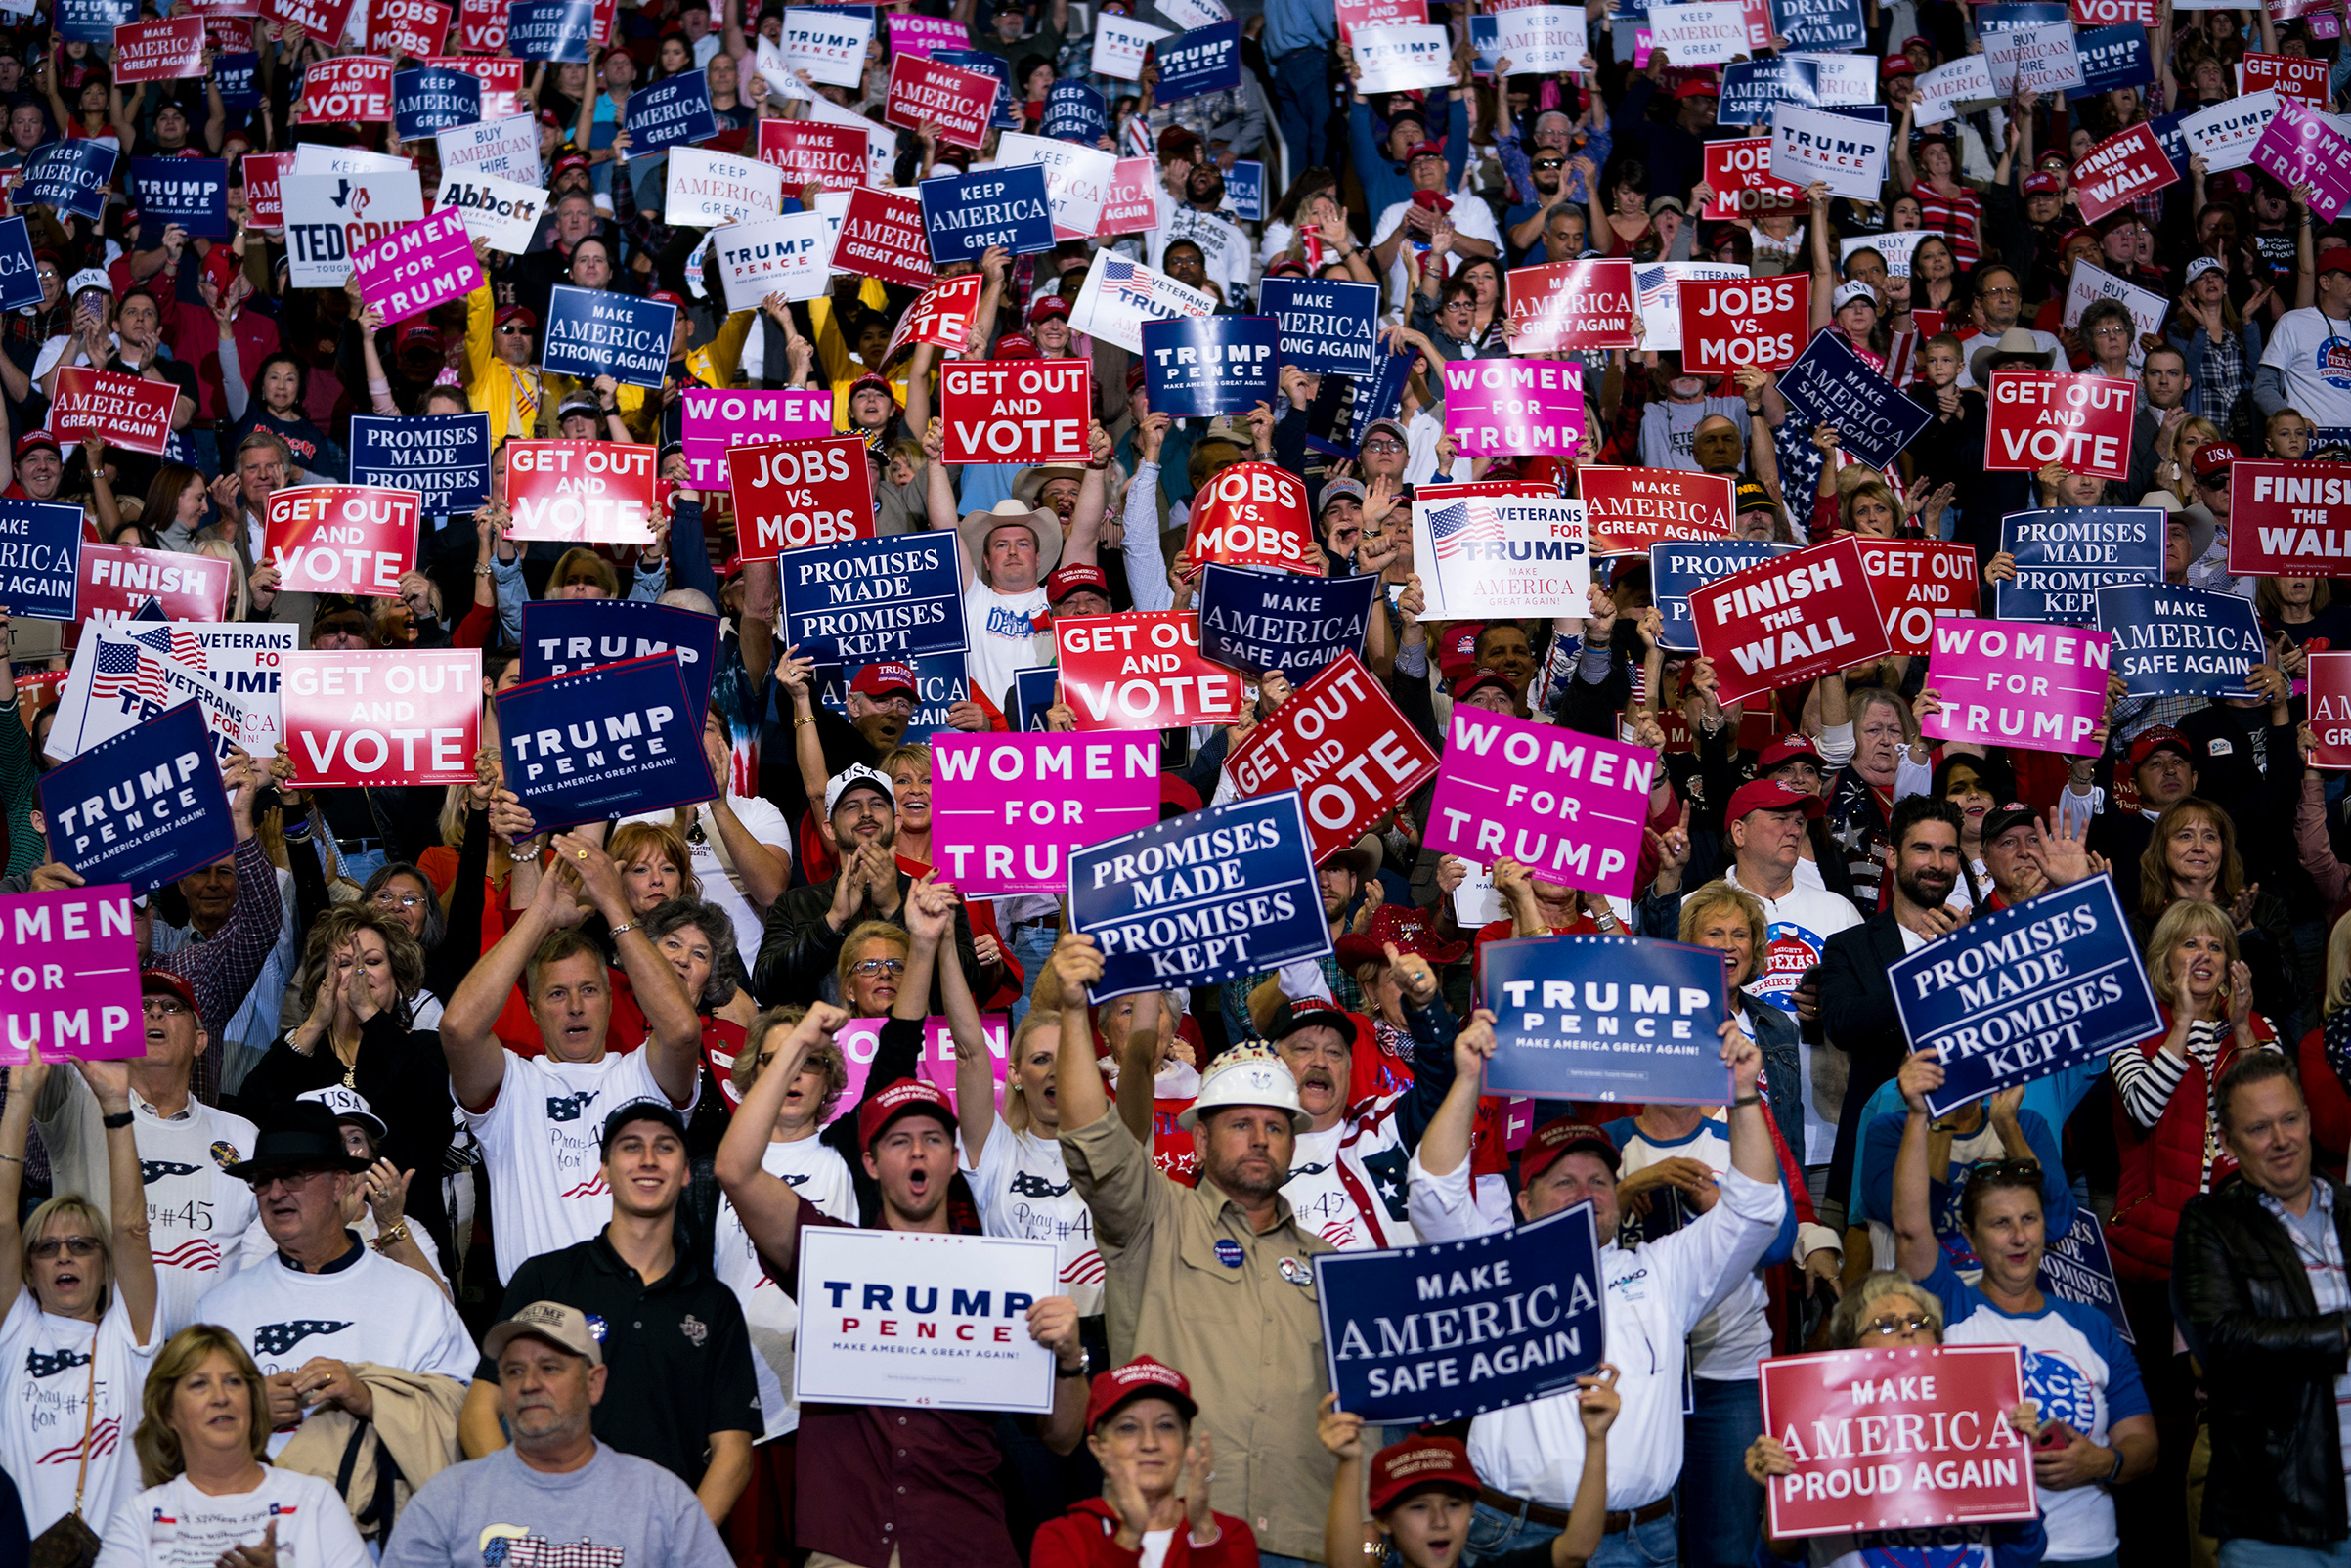 Supporters of President Donald Trump during a campaign rally for Sen. Ted Cruz in Houston, Oct. 22, 2018. (Doug Mills—The New York Times/Redux)